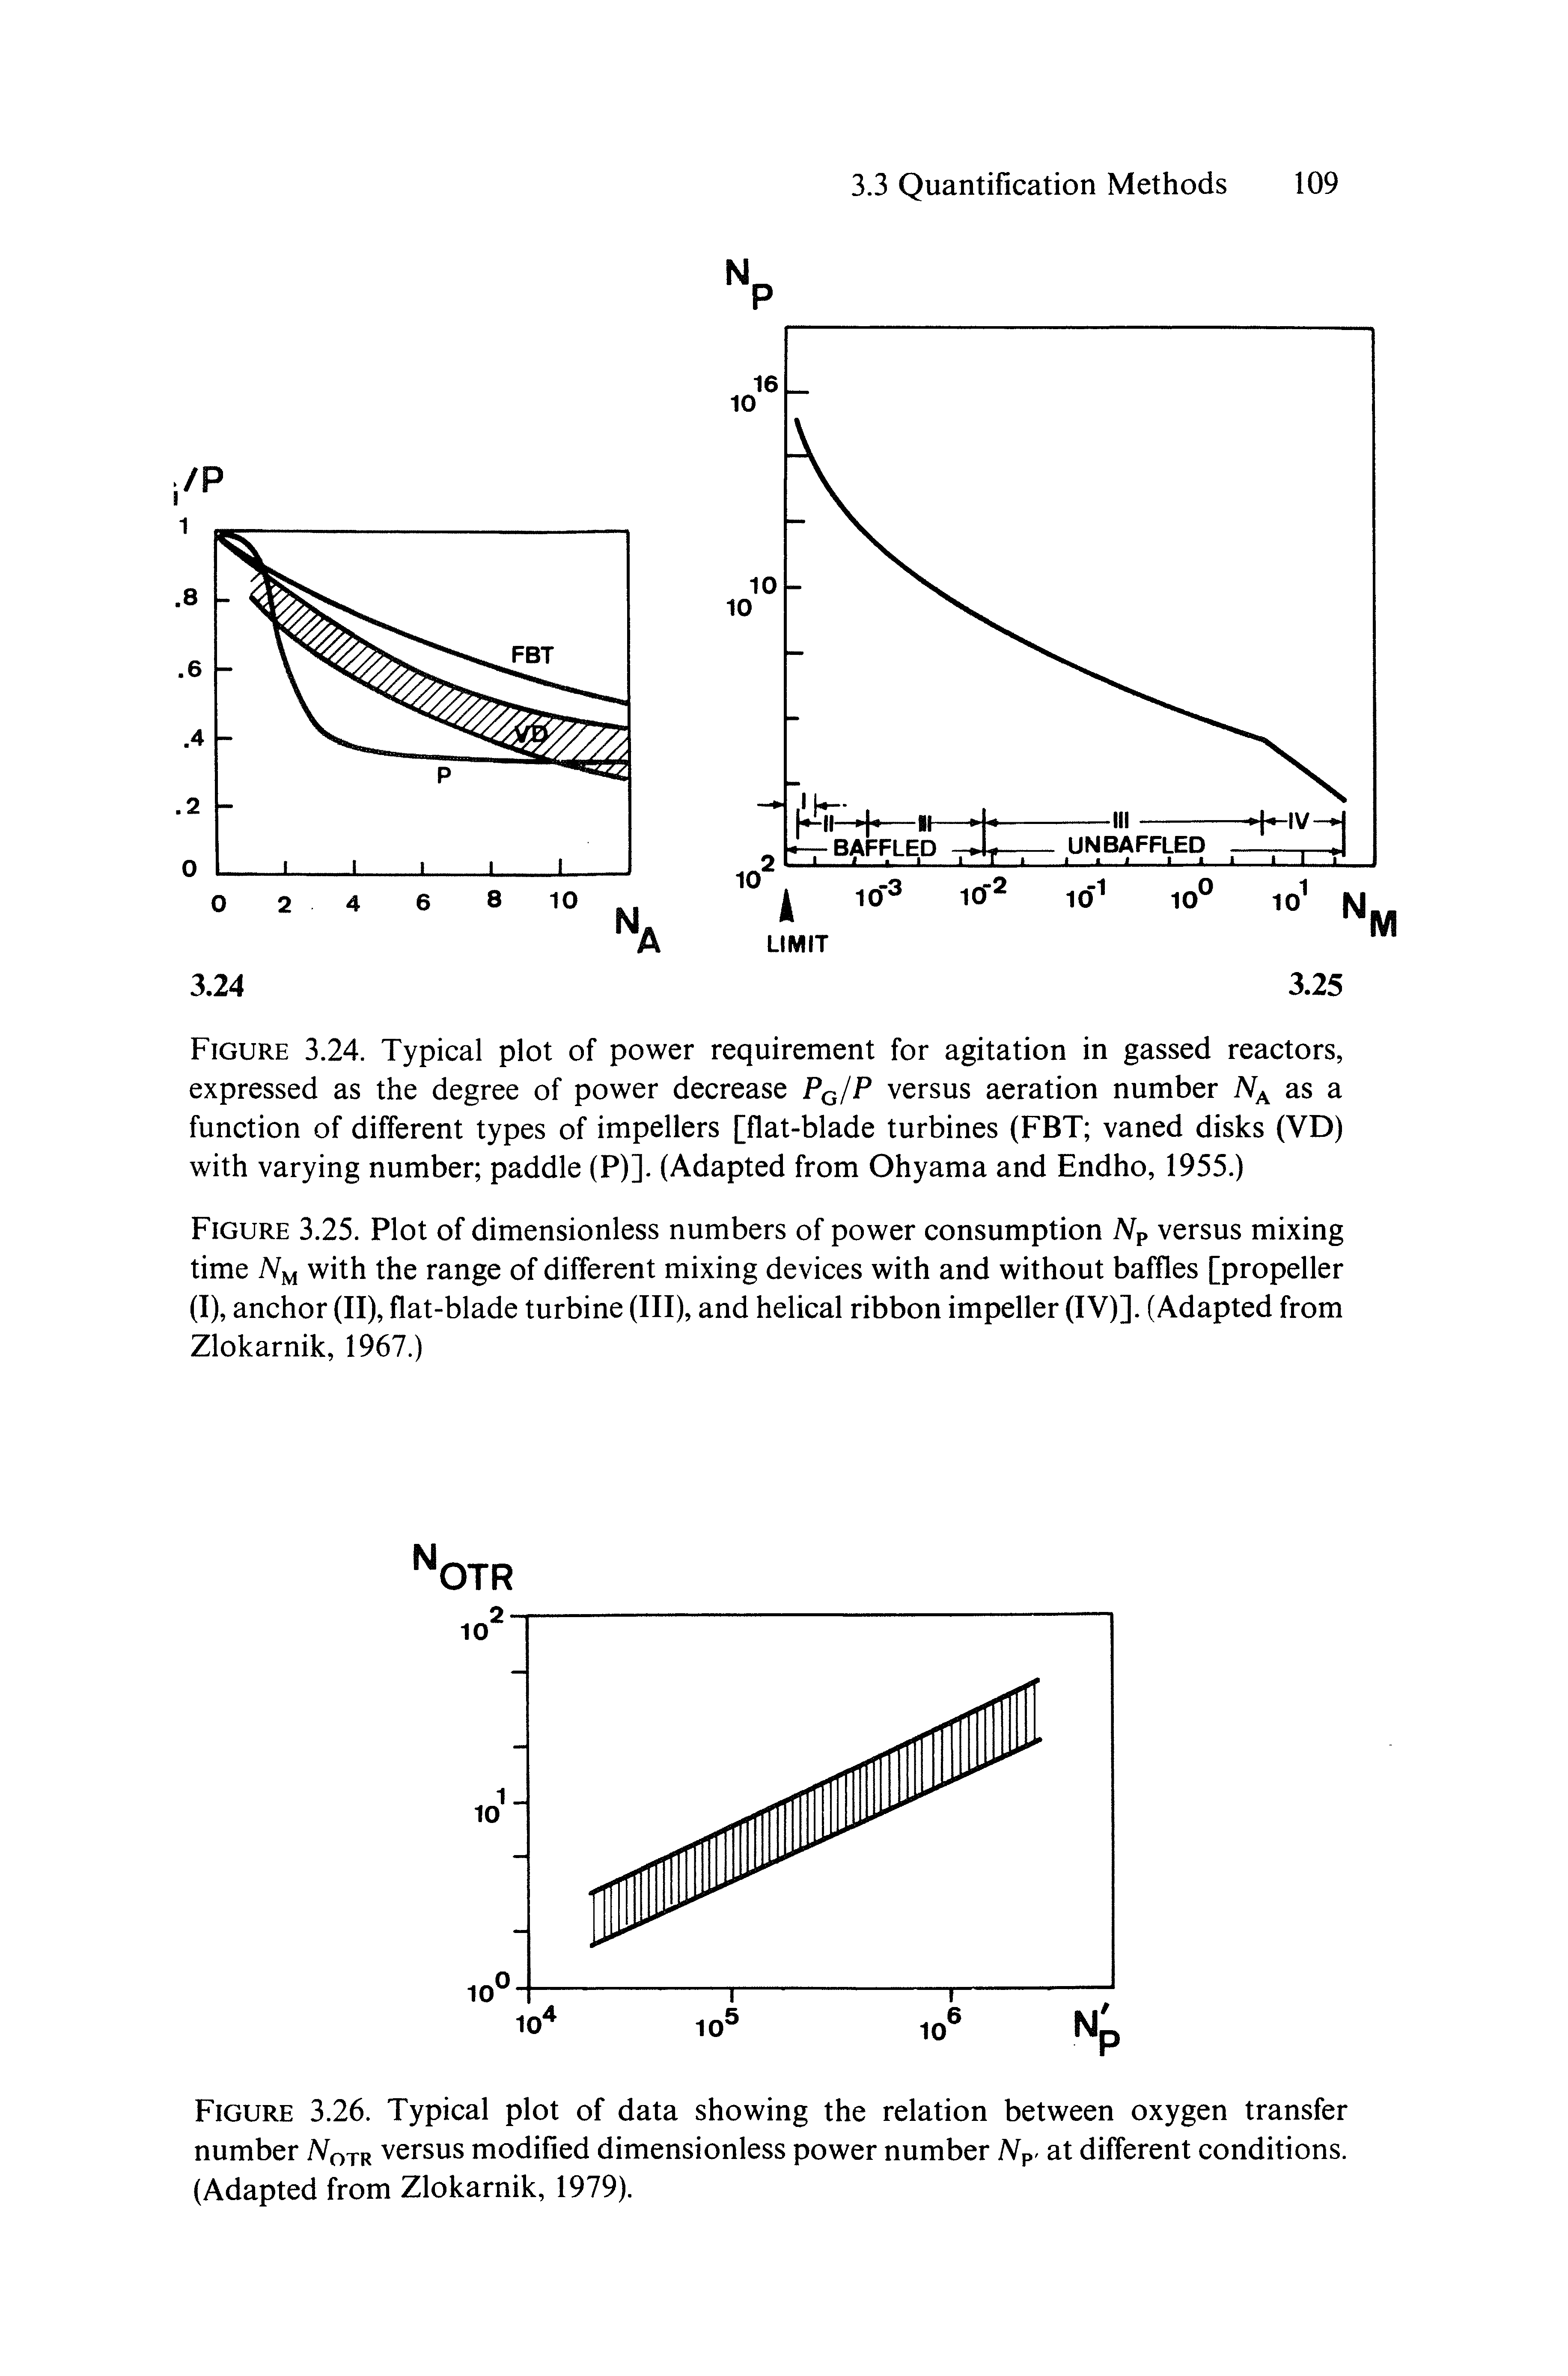 Figure 3.24. Typical plot of power requirement for agitation in gassed reactors, expressed as the degree of power decrease PqIP versus aeration number as a function of different types of impellers [flat-blade turbines (FBT vaned disks (VD) with varying number paddle (P)]. (Adapted from Ohyama and Endho, 1955.)...